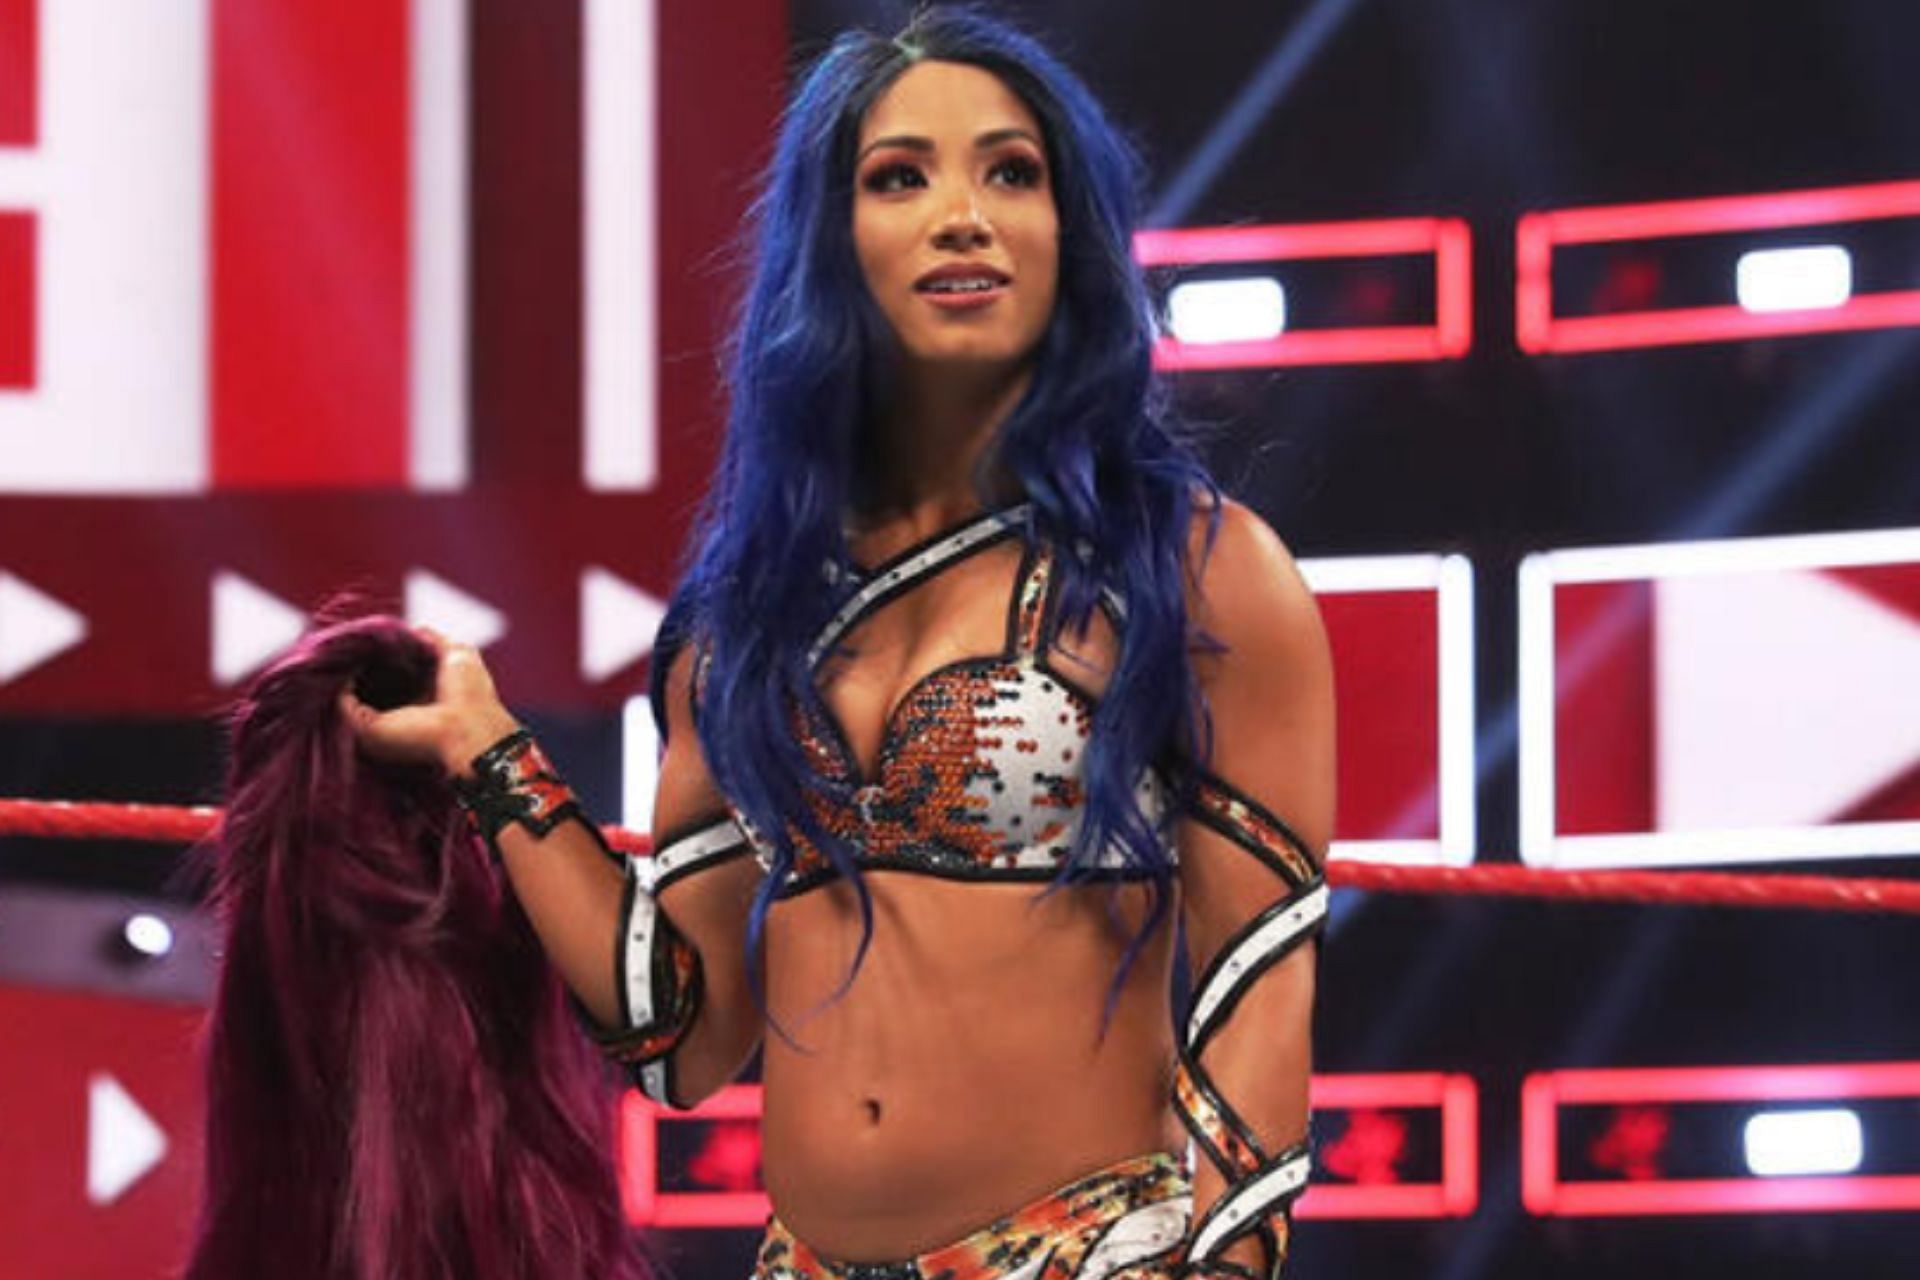 Mercedes Mone has revealed her plans to return to WWE {Image Source: www.wwe.com]